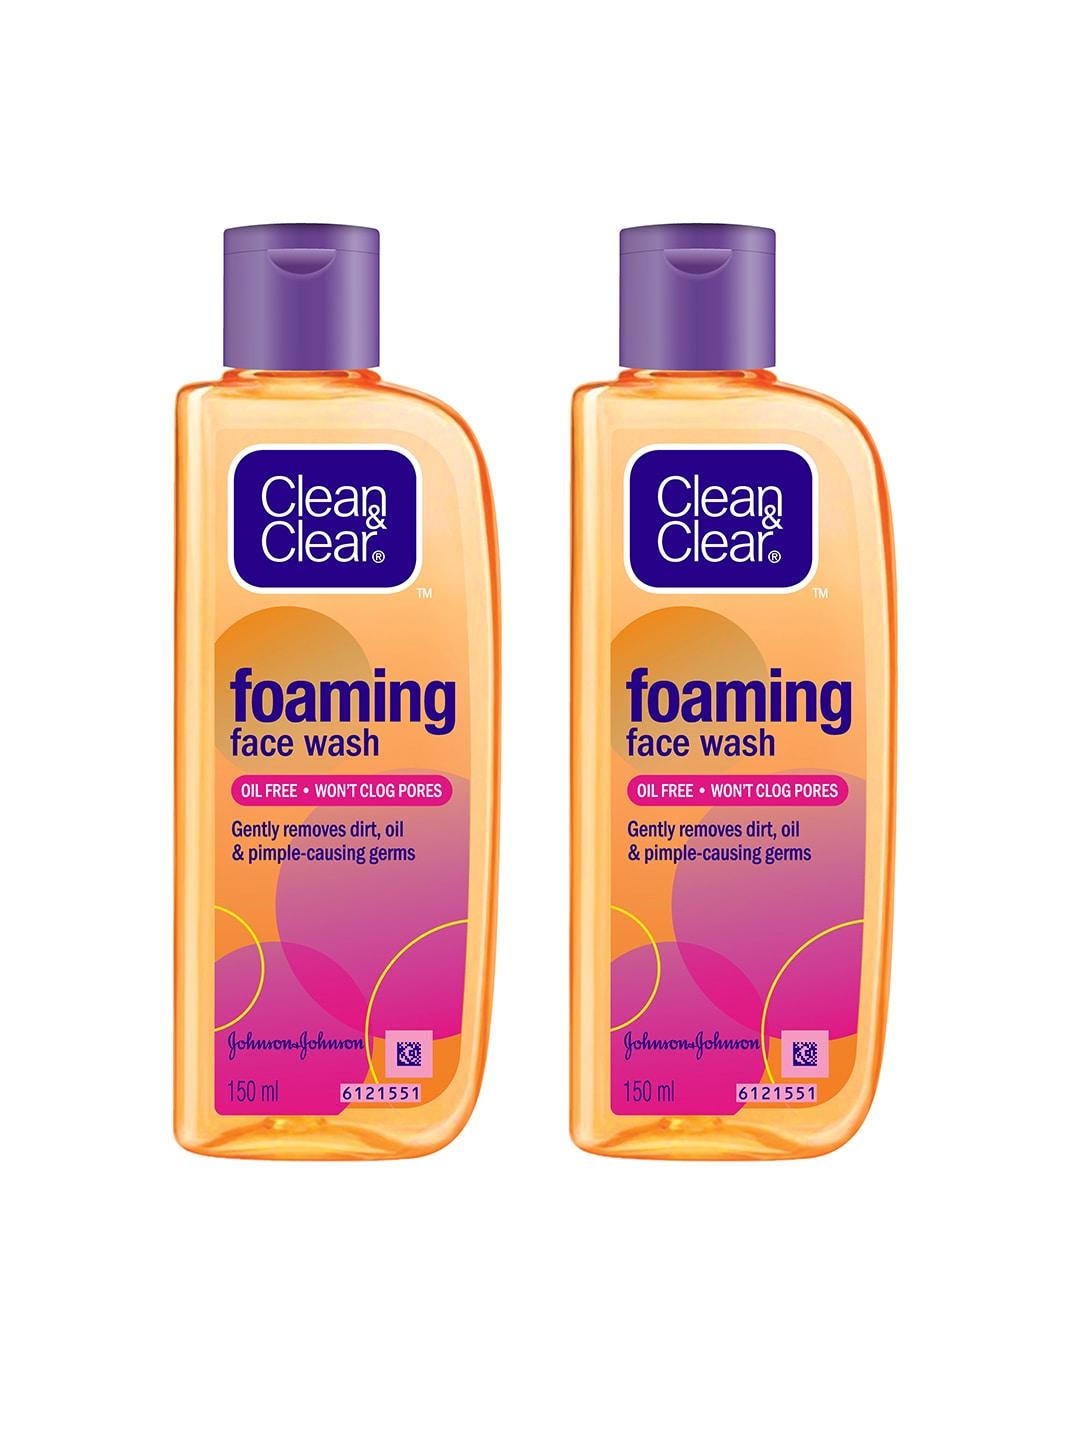 Clean&Clear Set of 2 Foaming Face Wash for Oily Skin, Acne Prone Skin - 150 ml Each